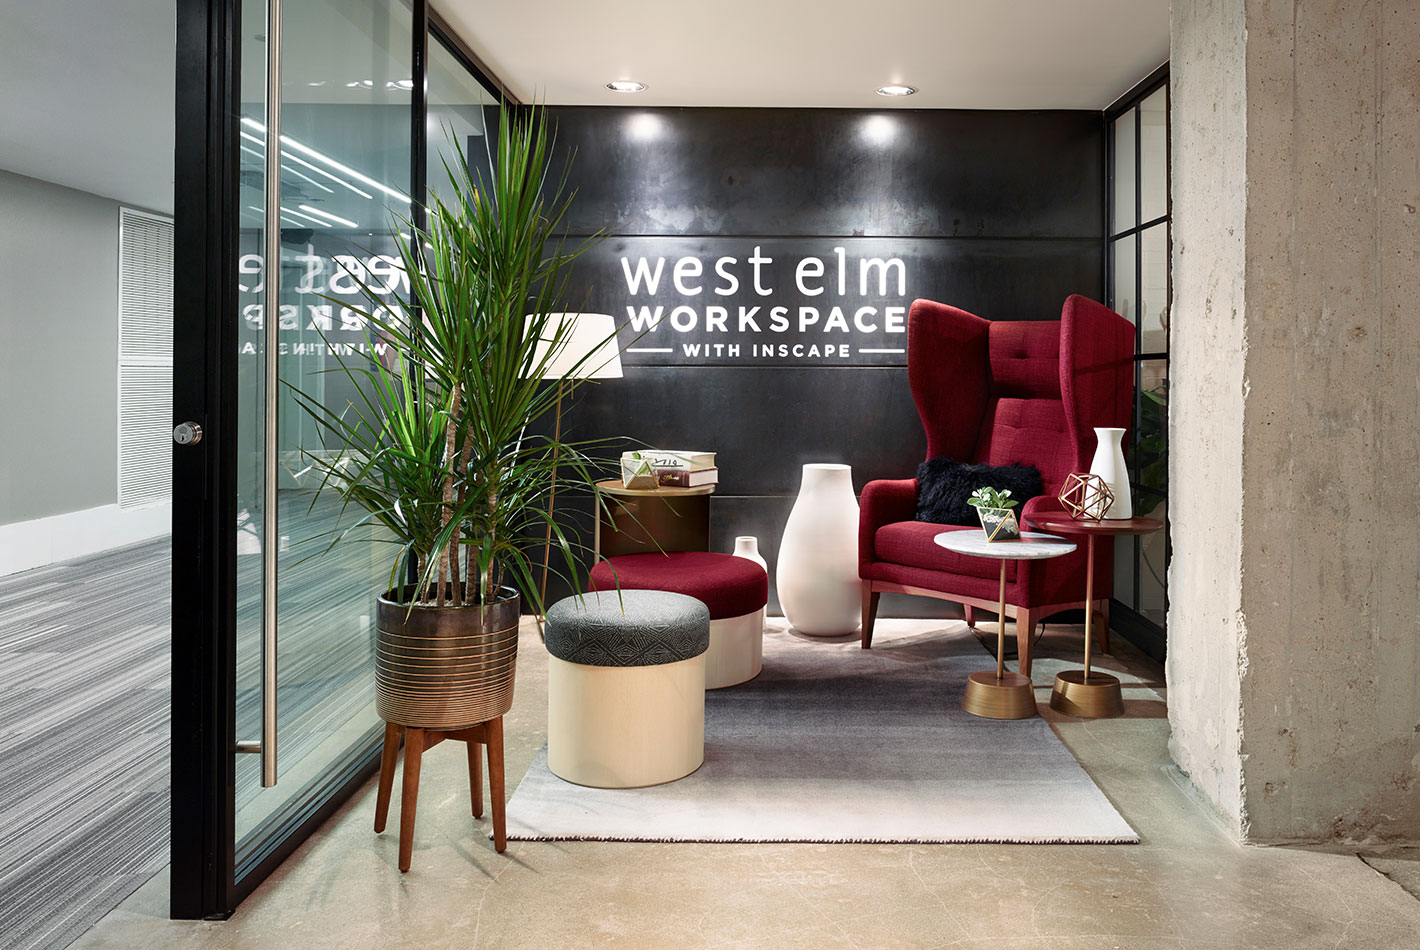 A full cranberry-colored wingback chair and several stools create a sales vignette at the West Elm NeoCon showroom